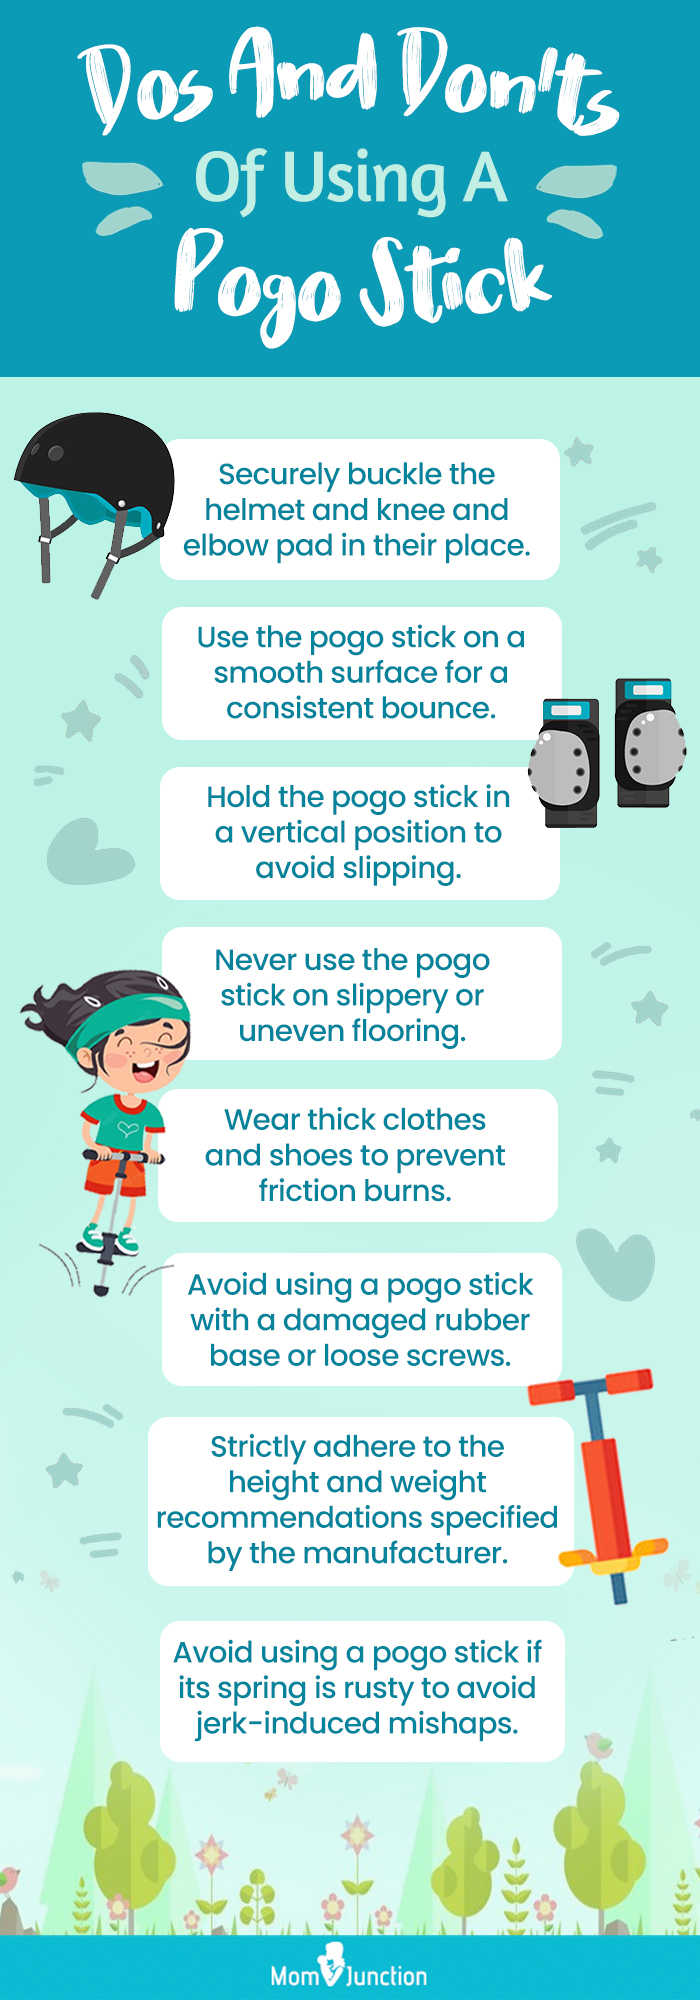 Dos And Don’ts Of Using A Pogo Stick (infographic)